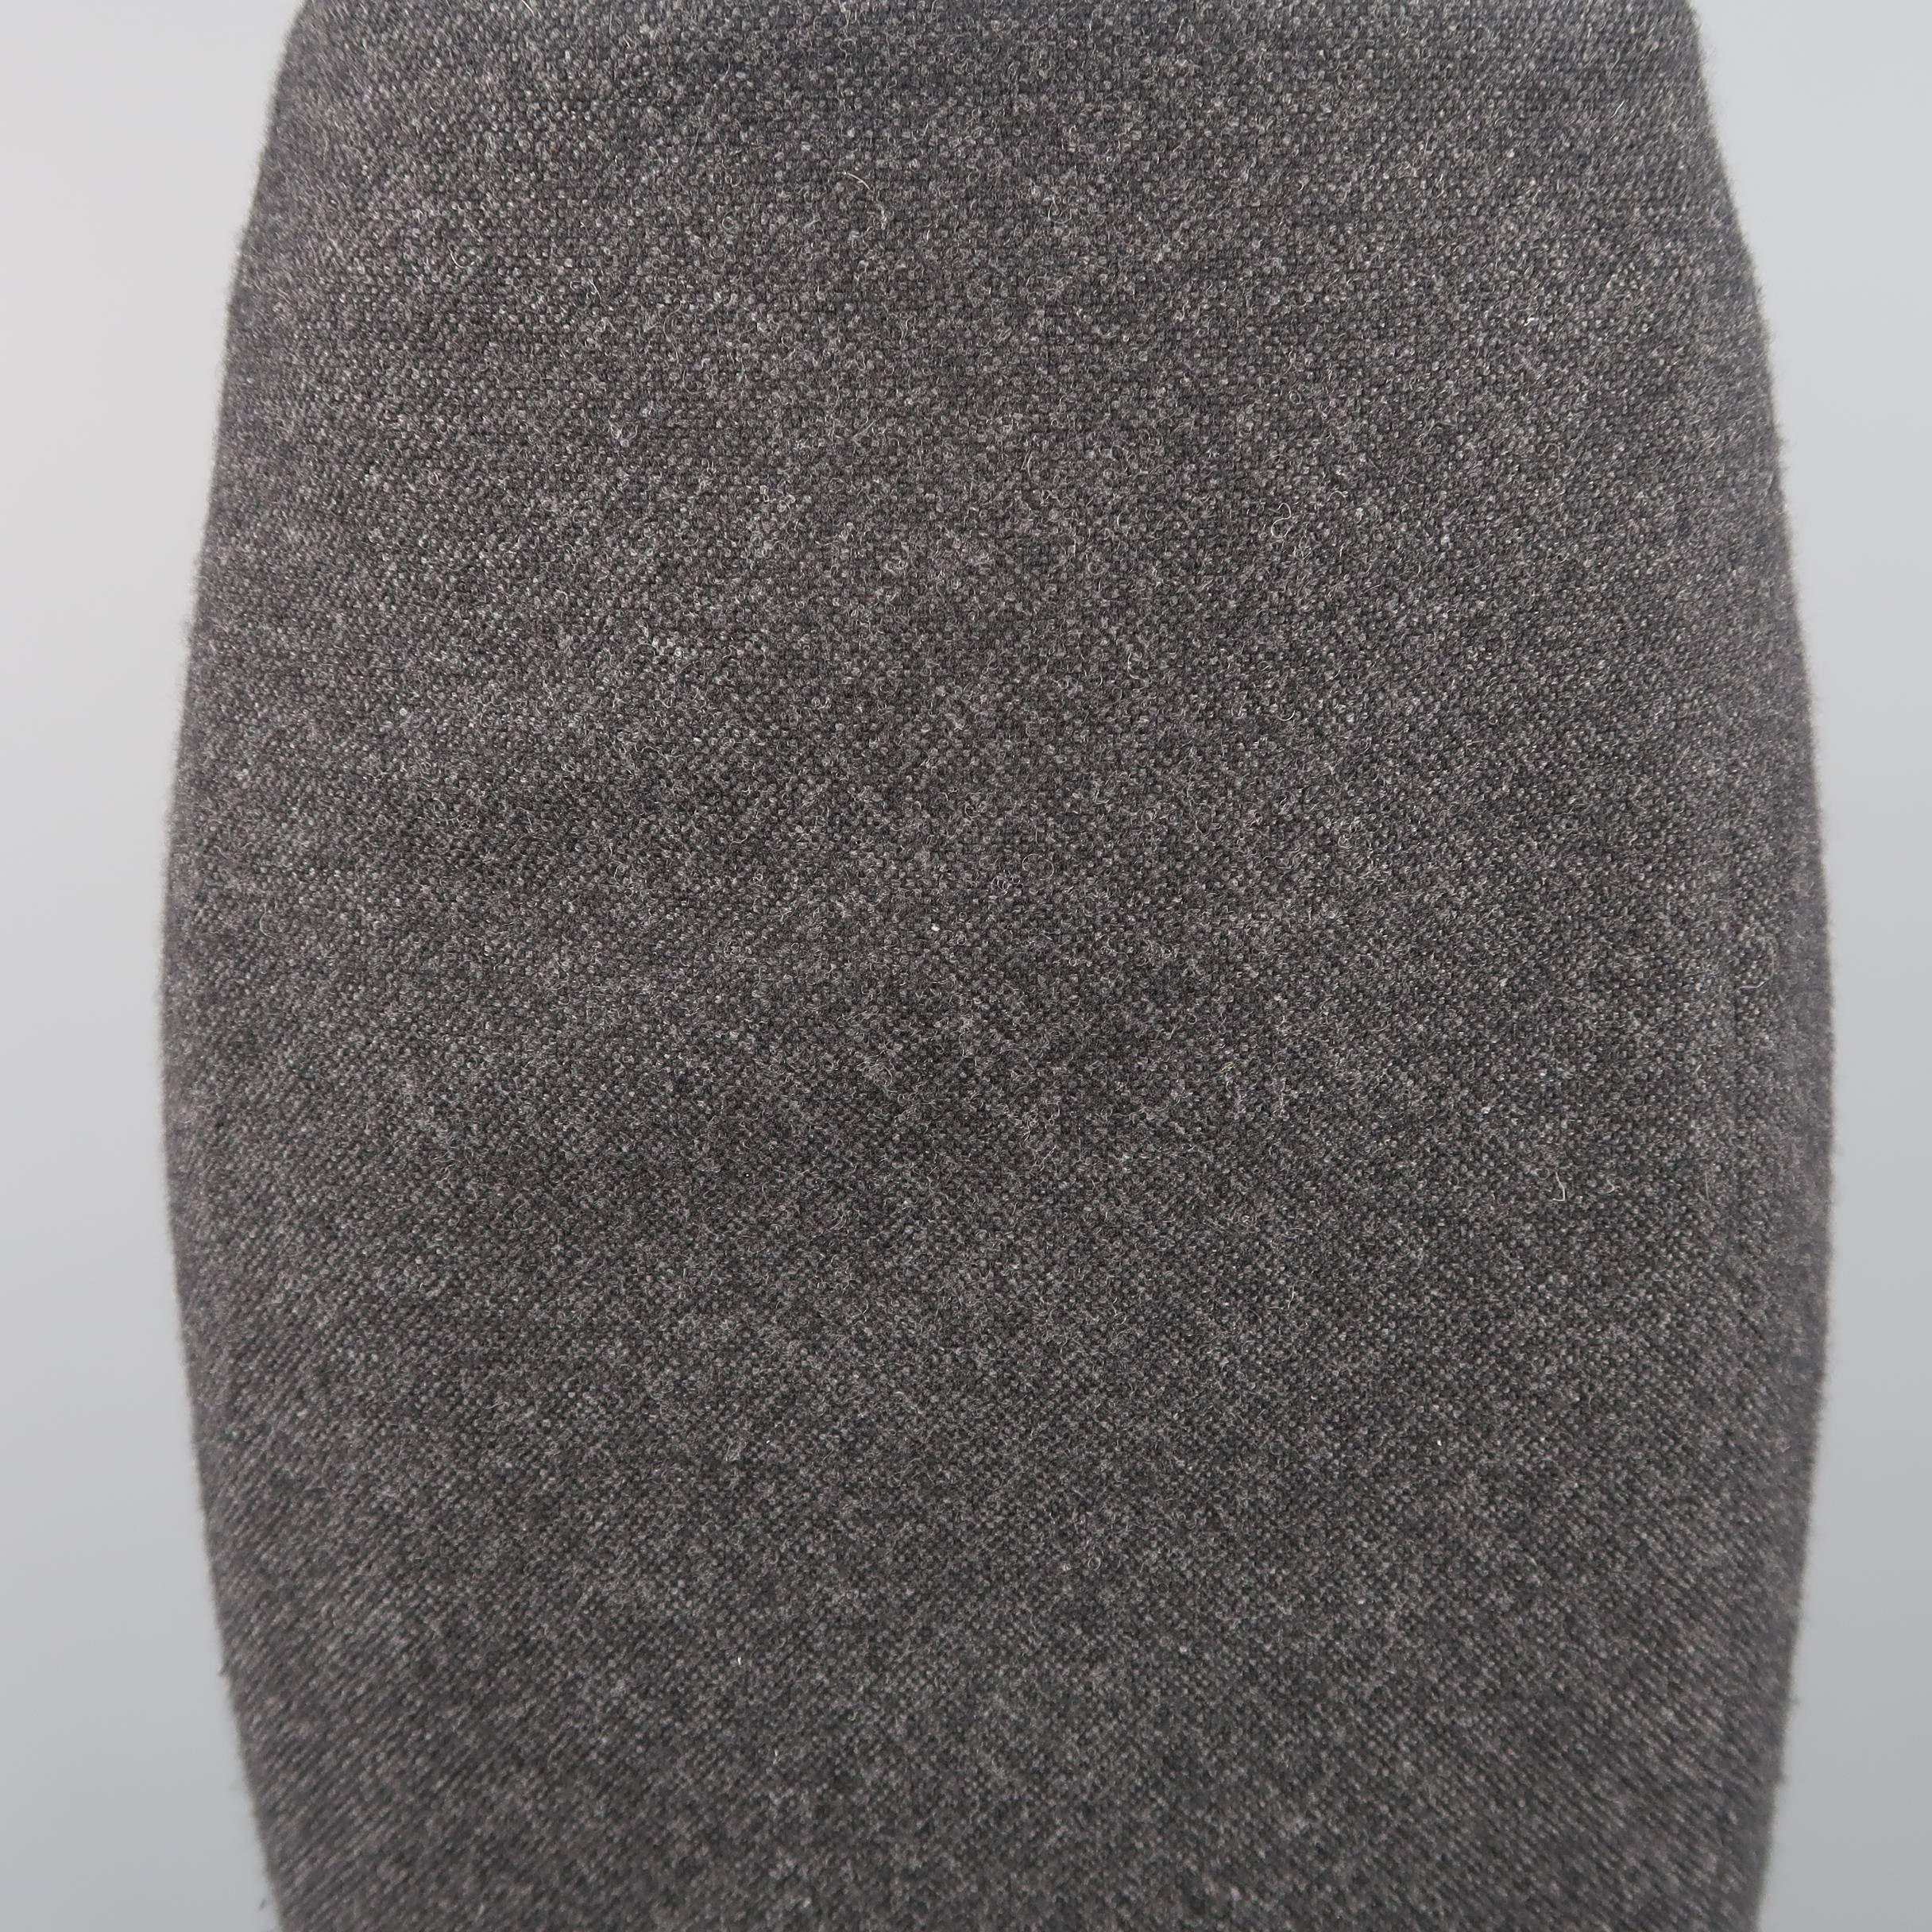 RALPH LAUREN COLLECTION pencil skirt comes in a charcoal gray textured wool cashmere blend with a classic silhouette and fishtail back. Made in USA.
 
Excellent Pre-Owned Condition.
Marked: 8
 
Measurements:
 
Waist: 30 in.
Hip: 37 in.
Length: 29